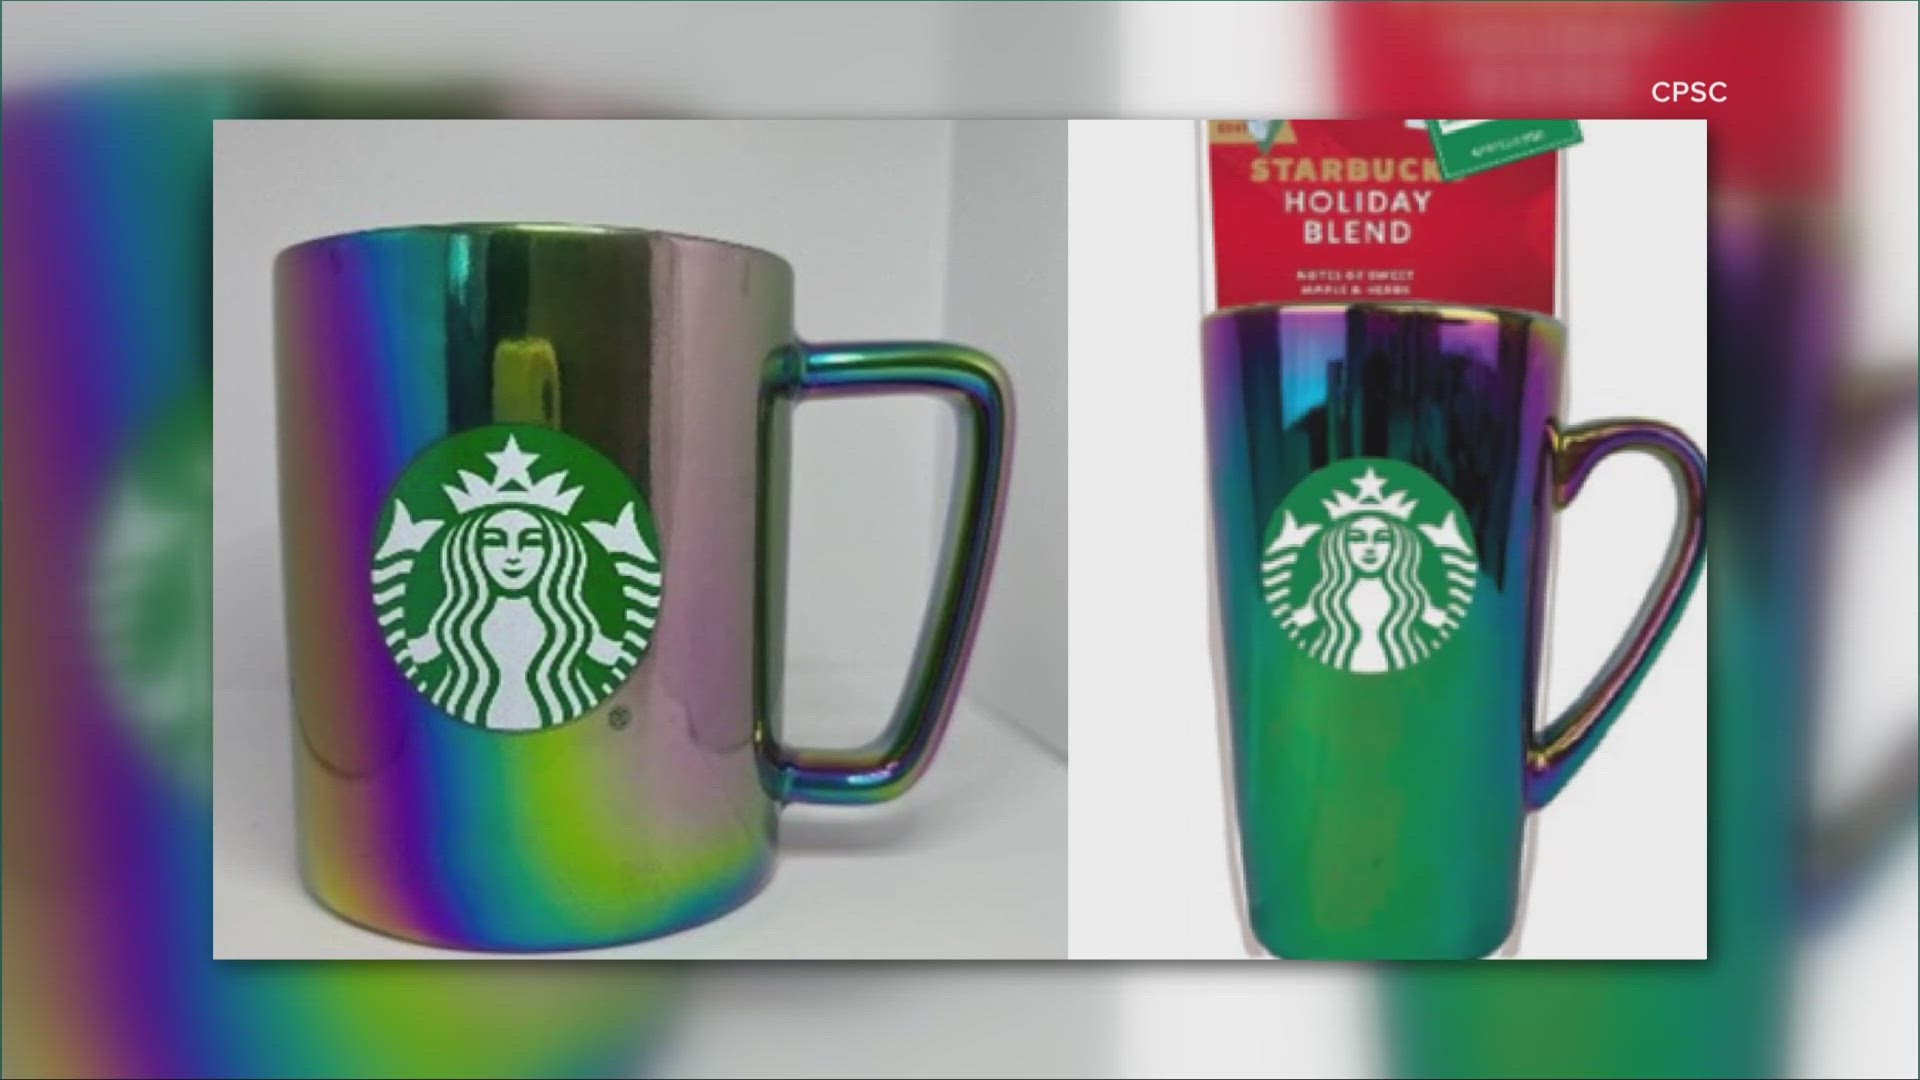 The recall involves four gift sets containing a ceramic mug with metallic coating. They were sold in 11-ounce and 16-ounce sizes as part of the gift sets.